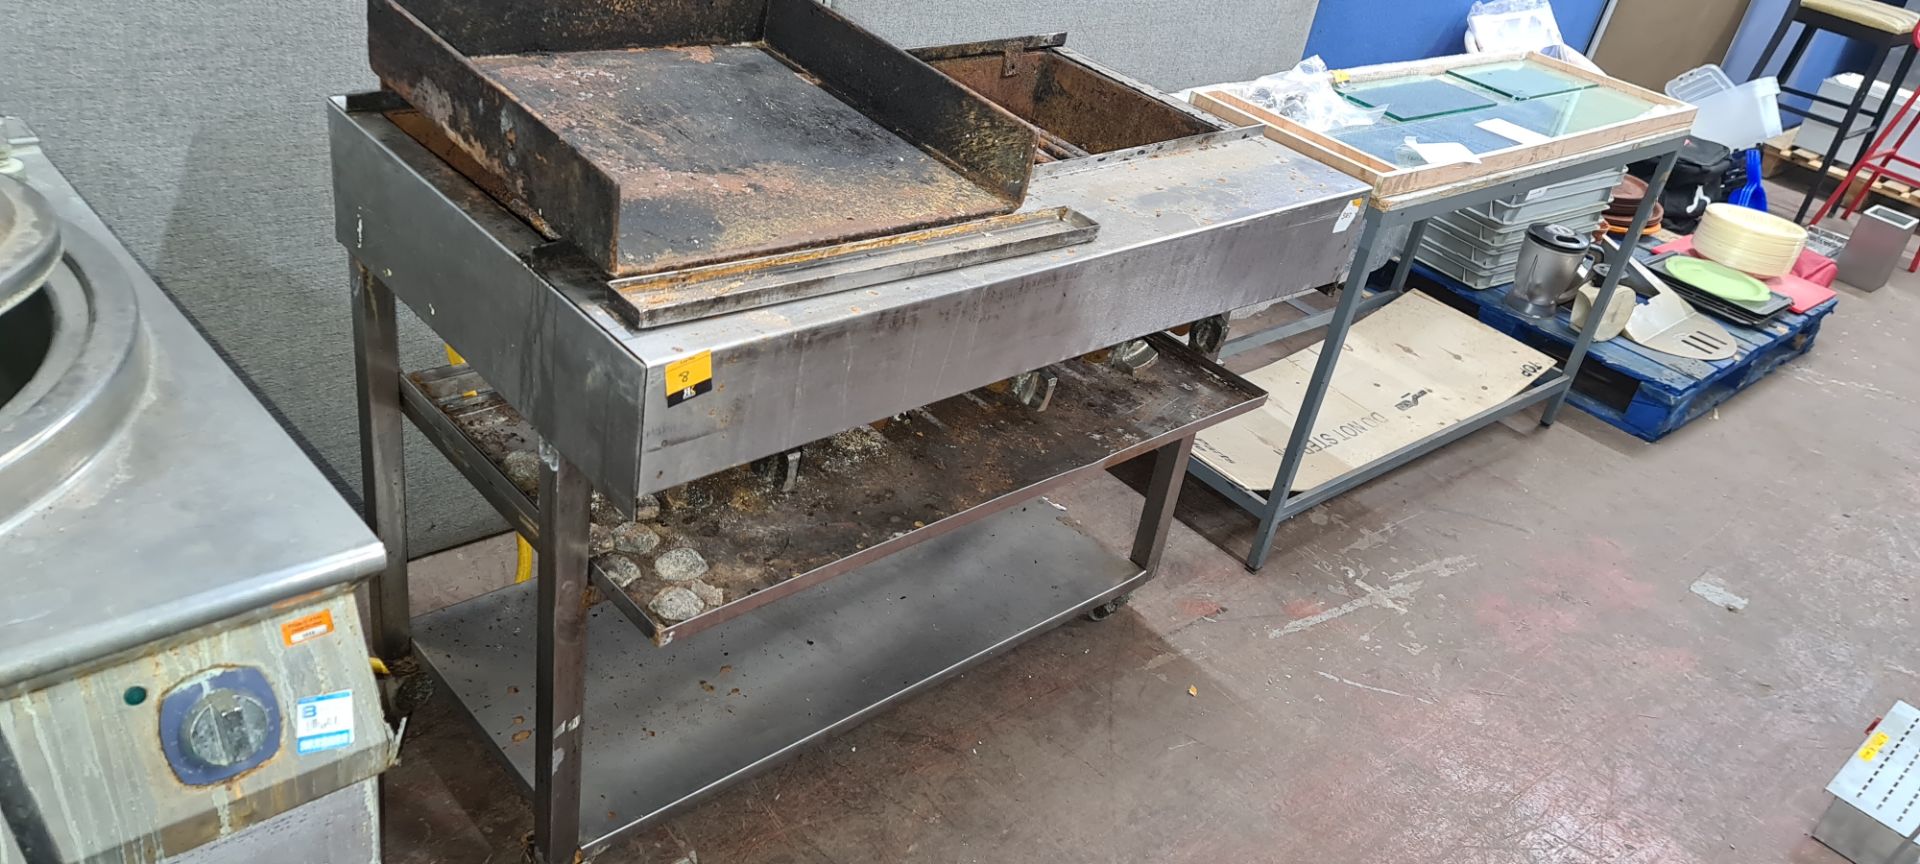 Large gas barbeque system